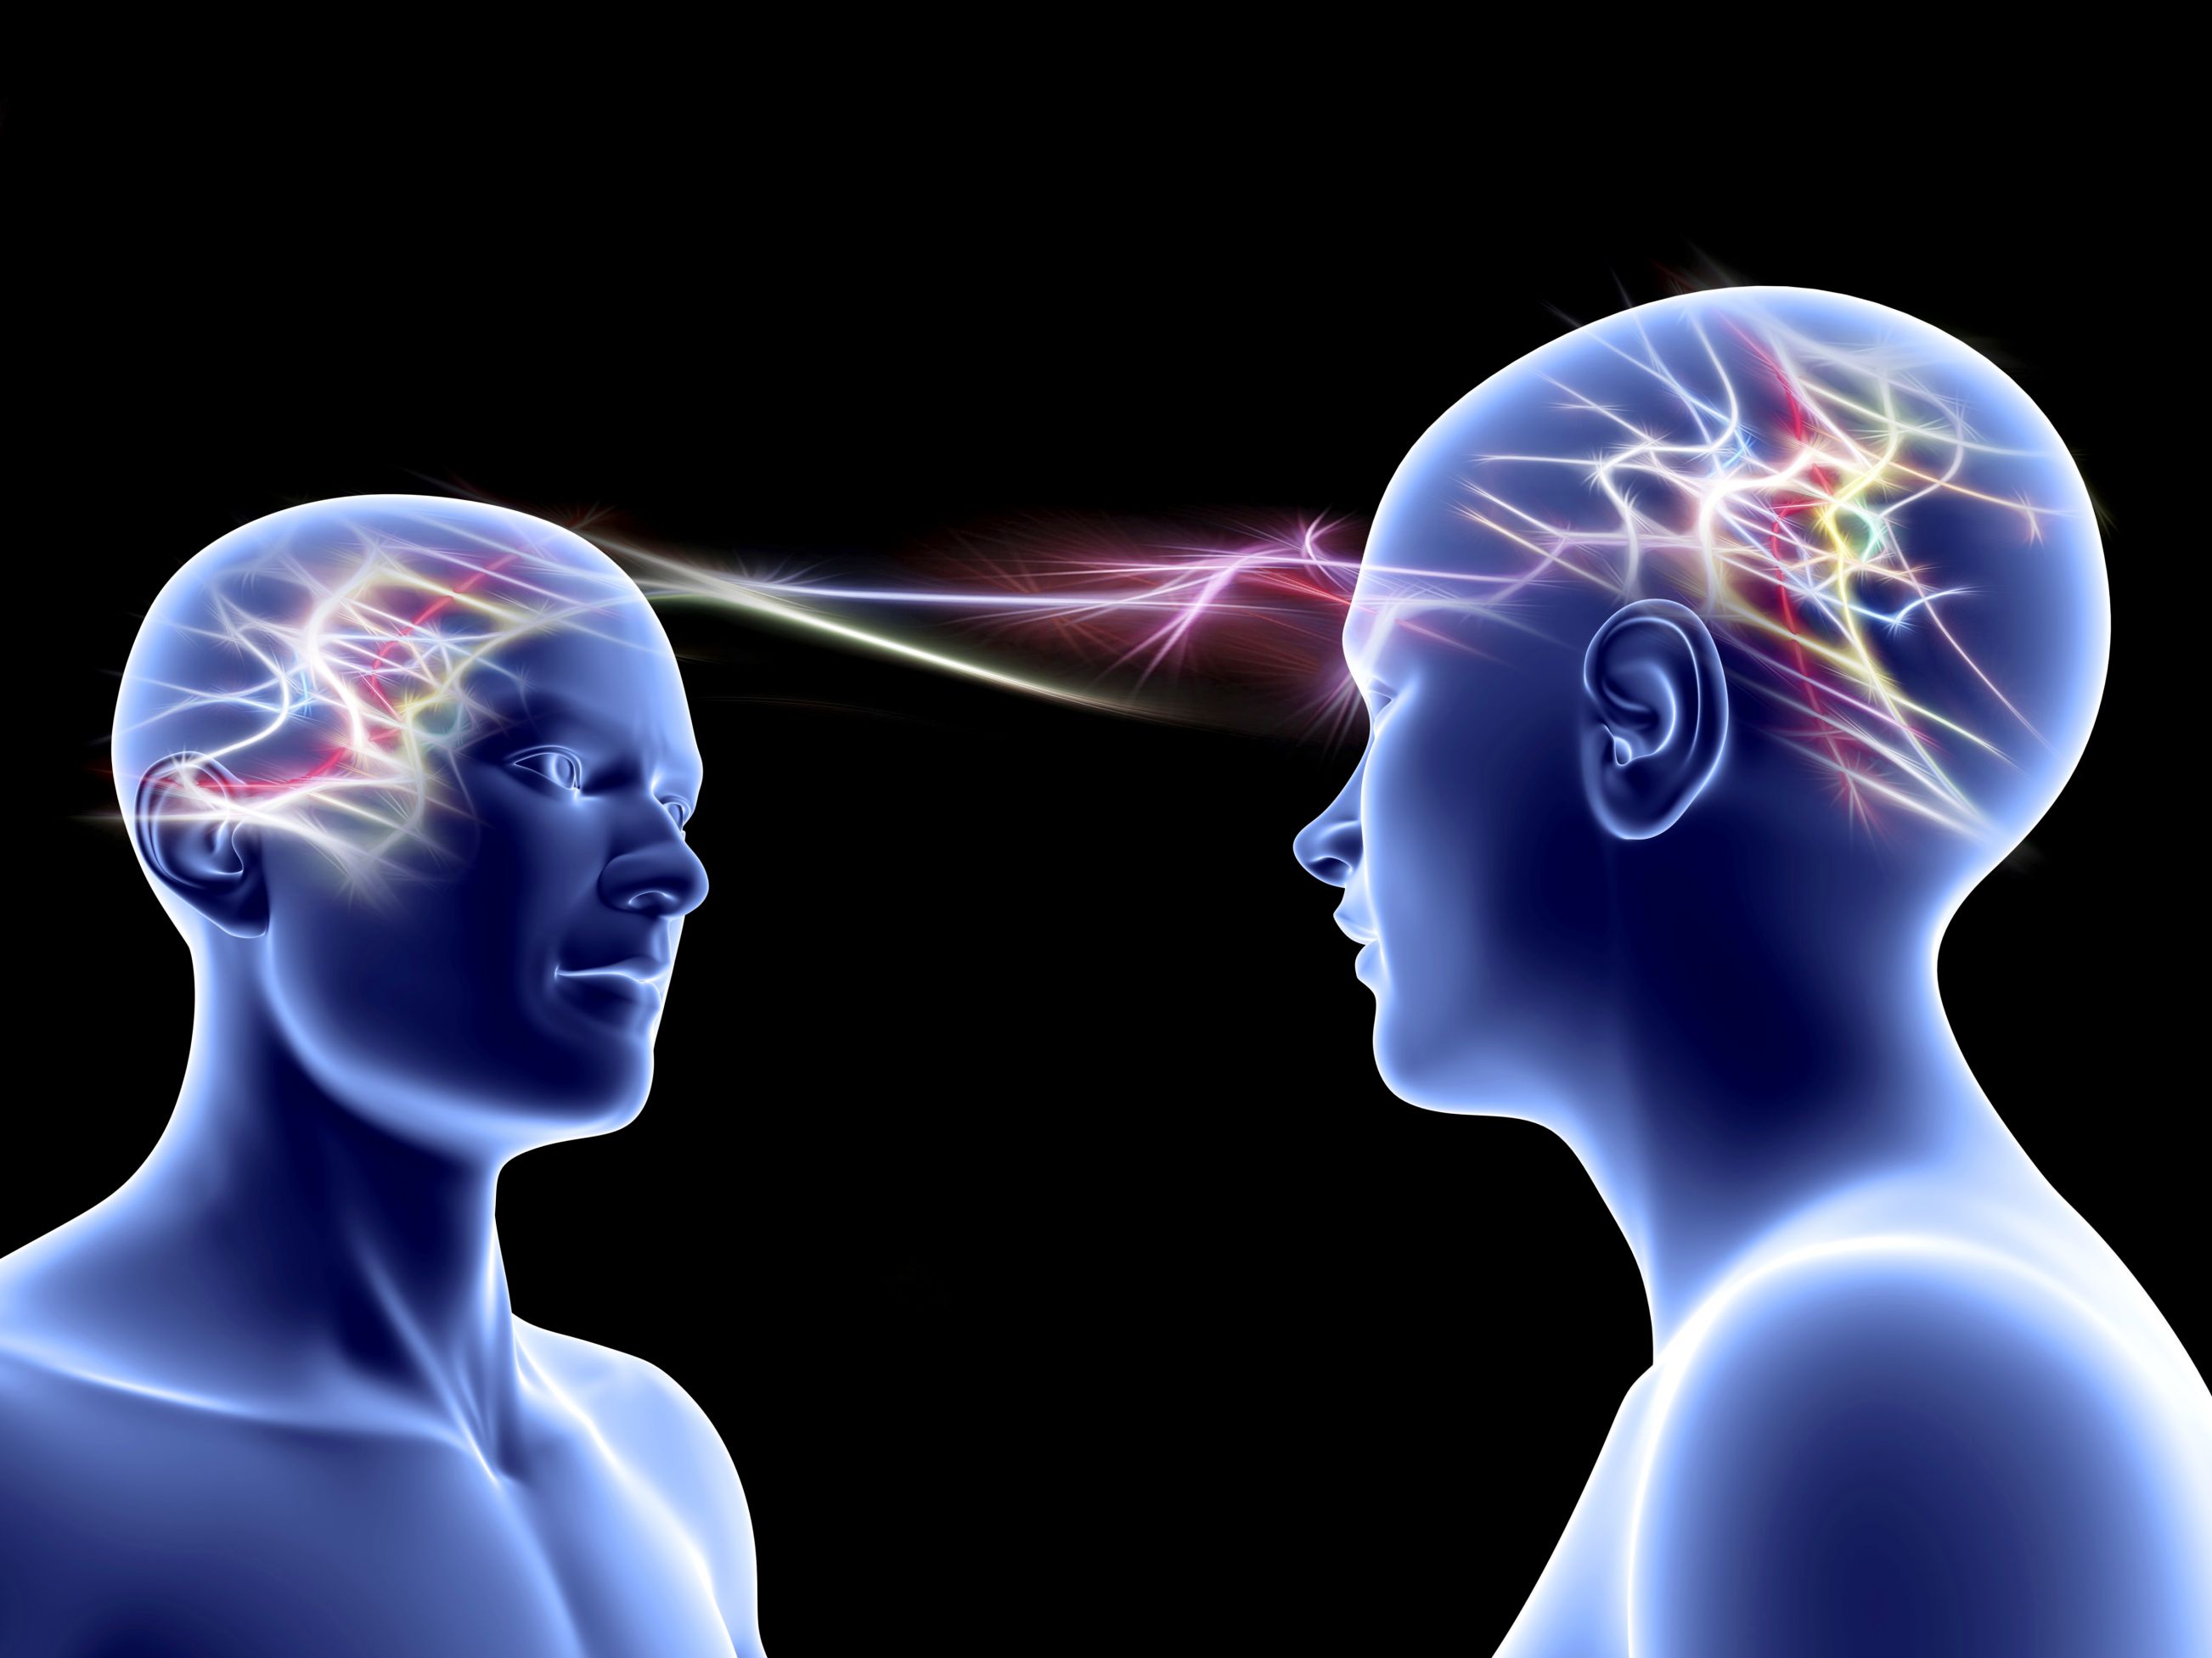 This illustration of two human beings indicates connection between the two through extrasensory perception, or ESP.